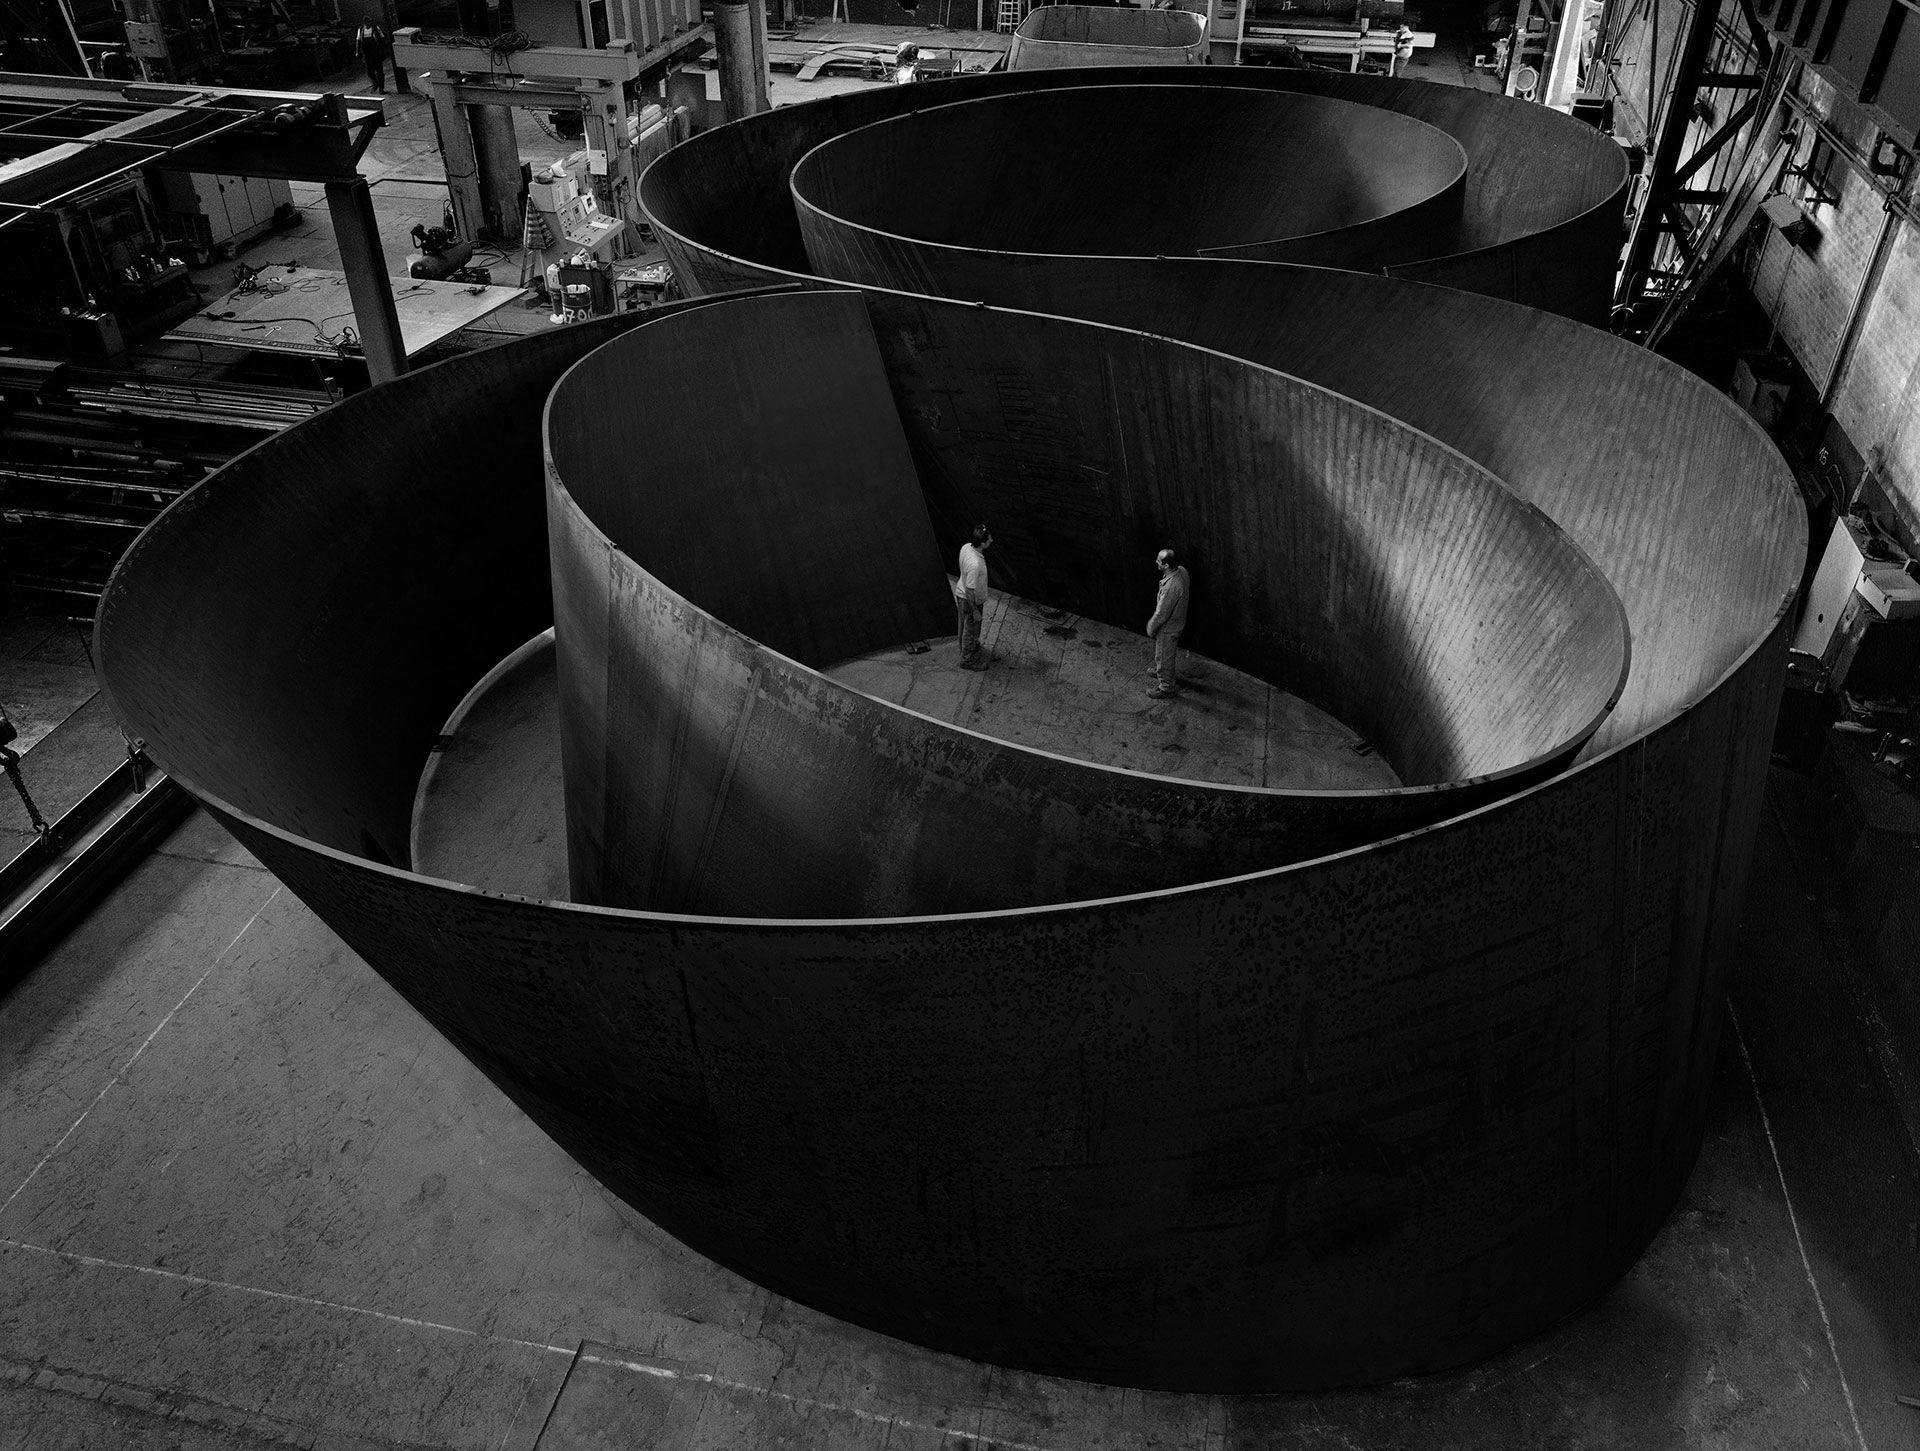 A steel sculpture by Richard Serra titled Sequence, dated 2006.